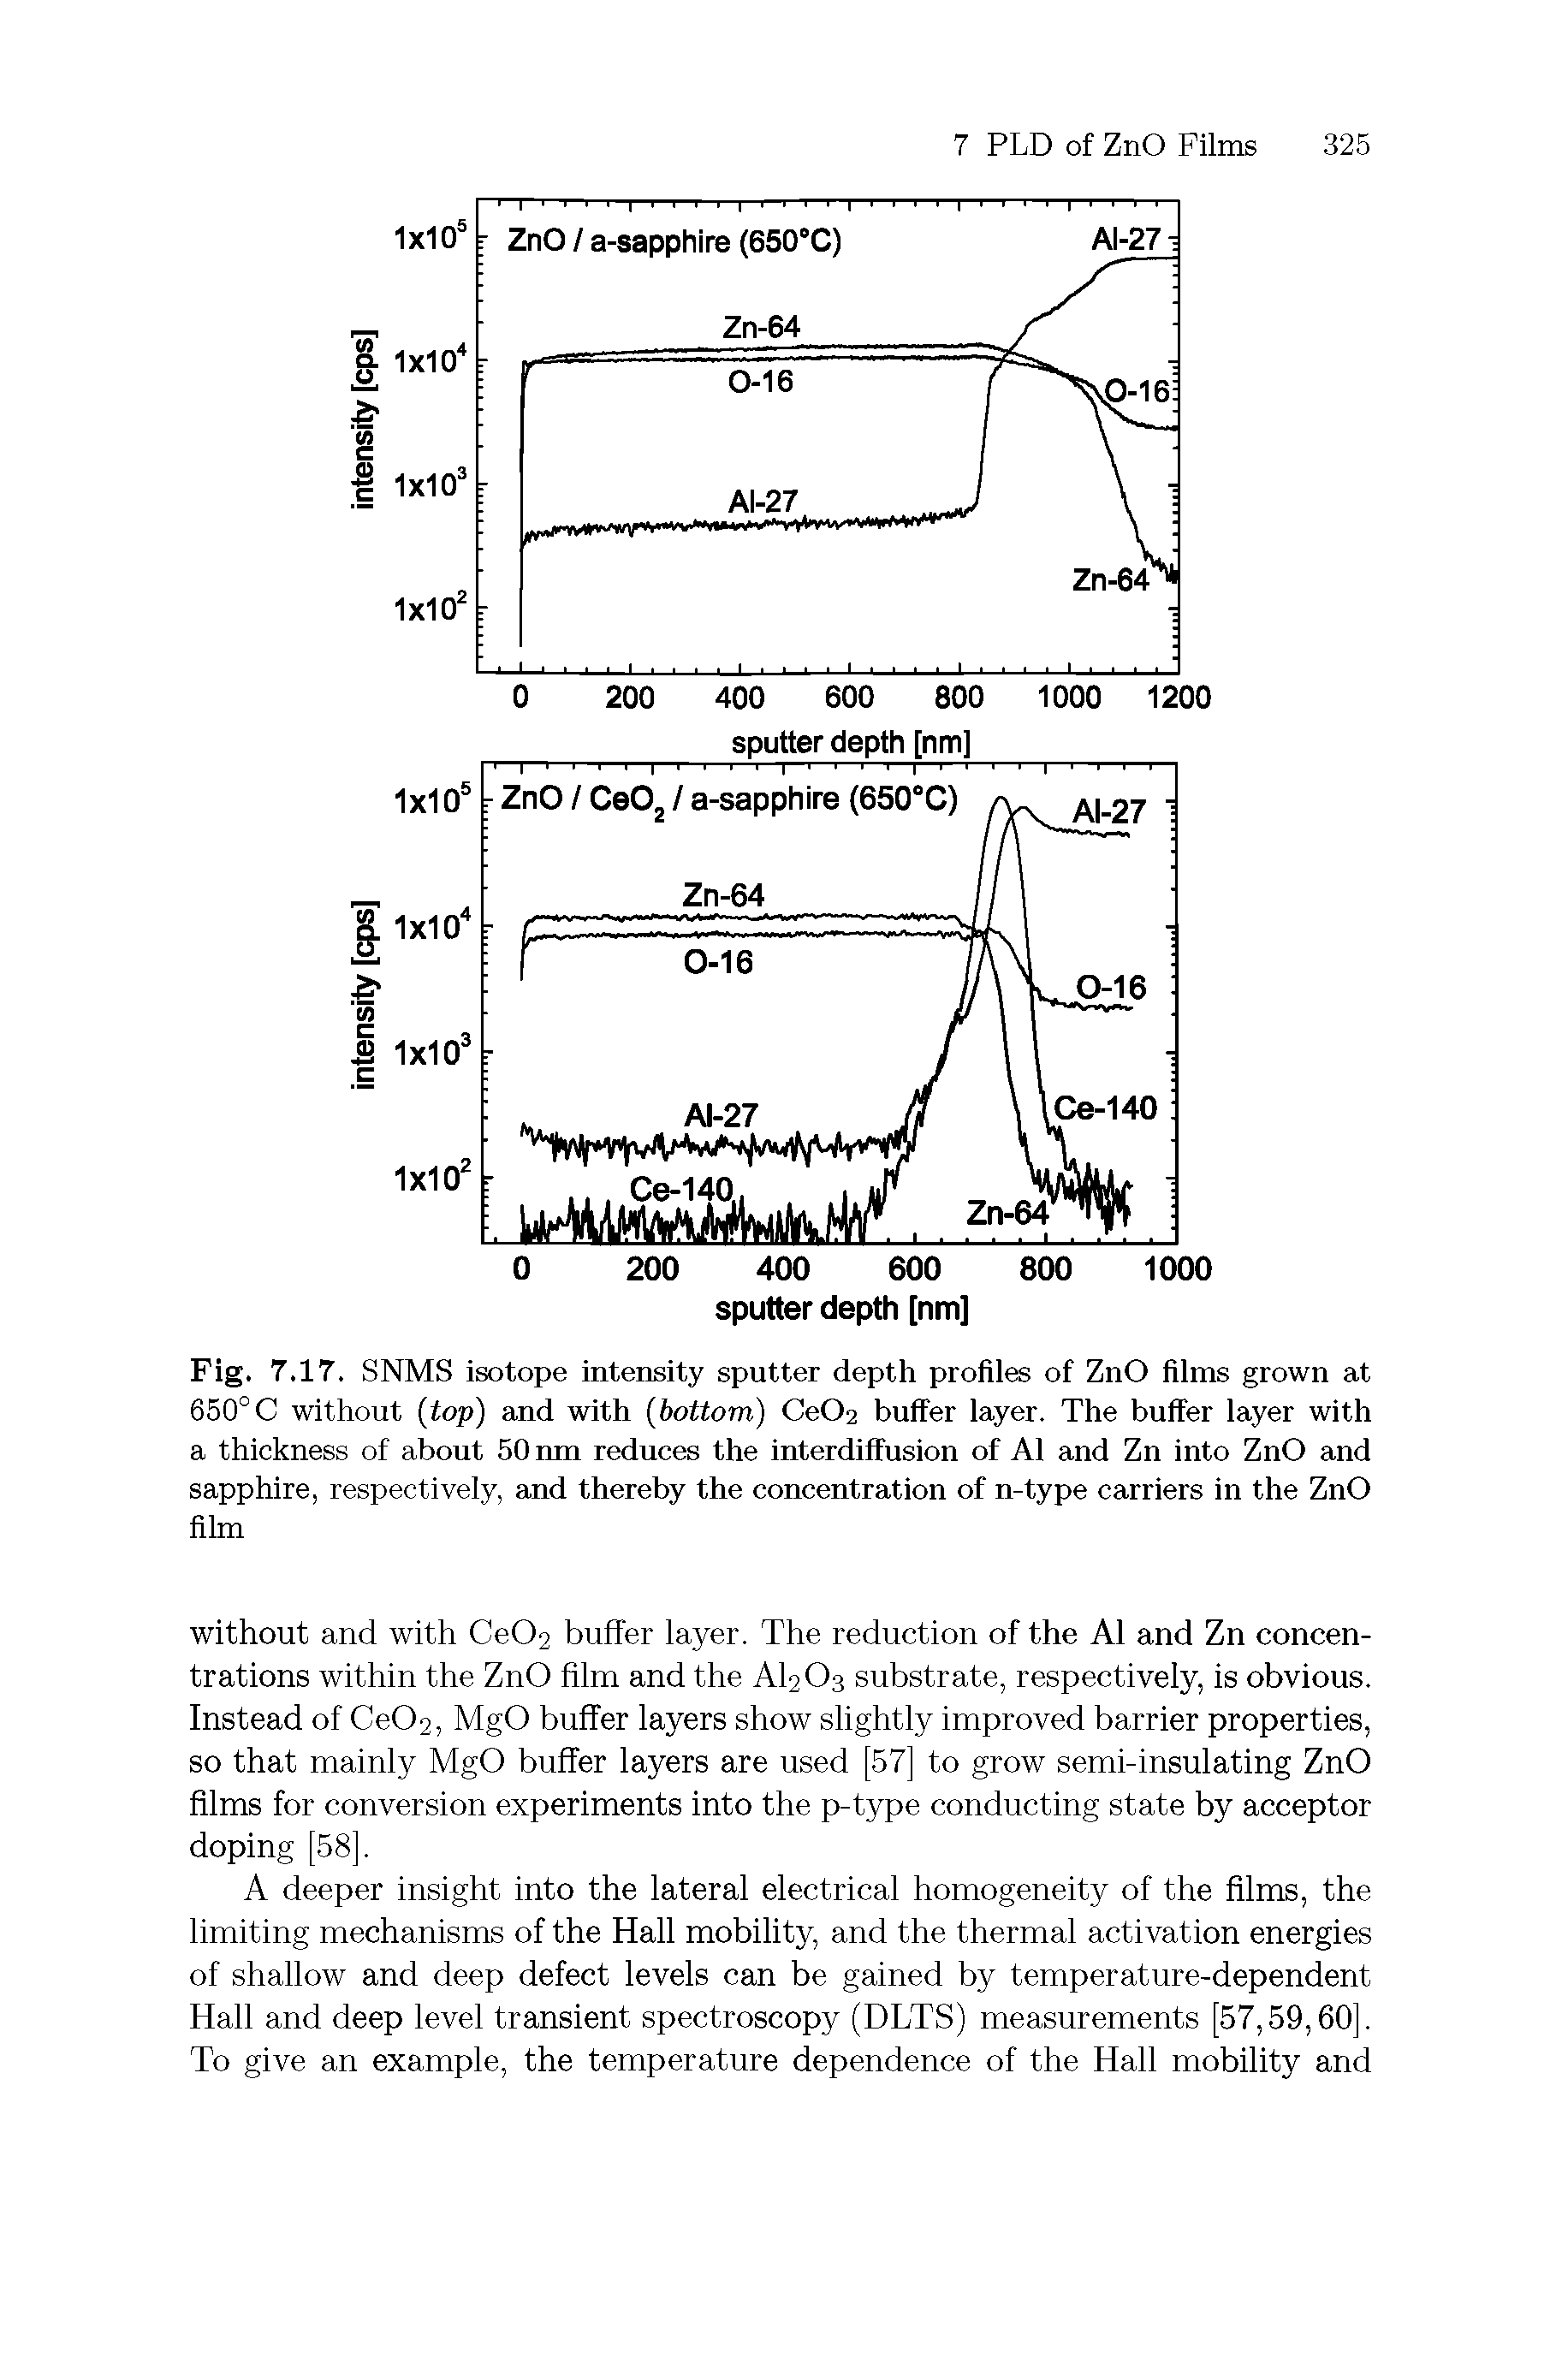 Fig. 7.17. SNMS isotope intensity sputter depth profiles of ZnO films grown at 650° C without (top) and with (bottom) Ce02 buffer layer. The buffer layer with a thickness of about 50 nm reduces the interdiffusion of A1 and Zn into ZnO and sapphire, respectively, and thereby the concentration of n-type carriers in the ZnO film...